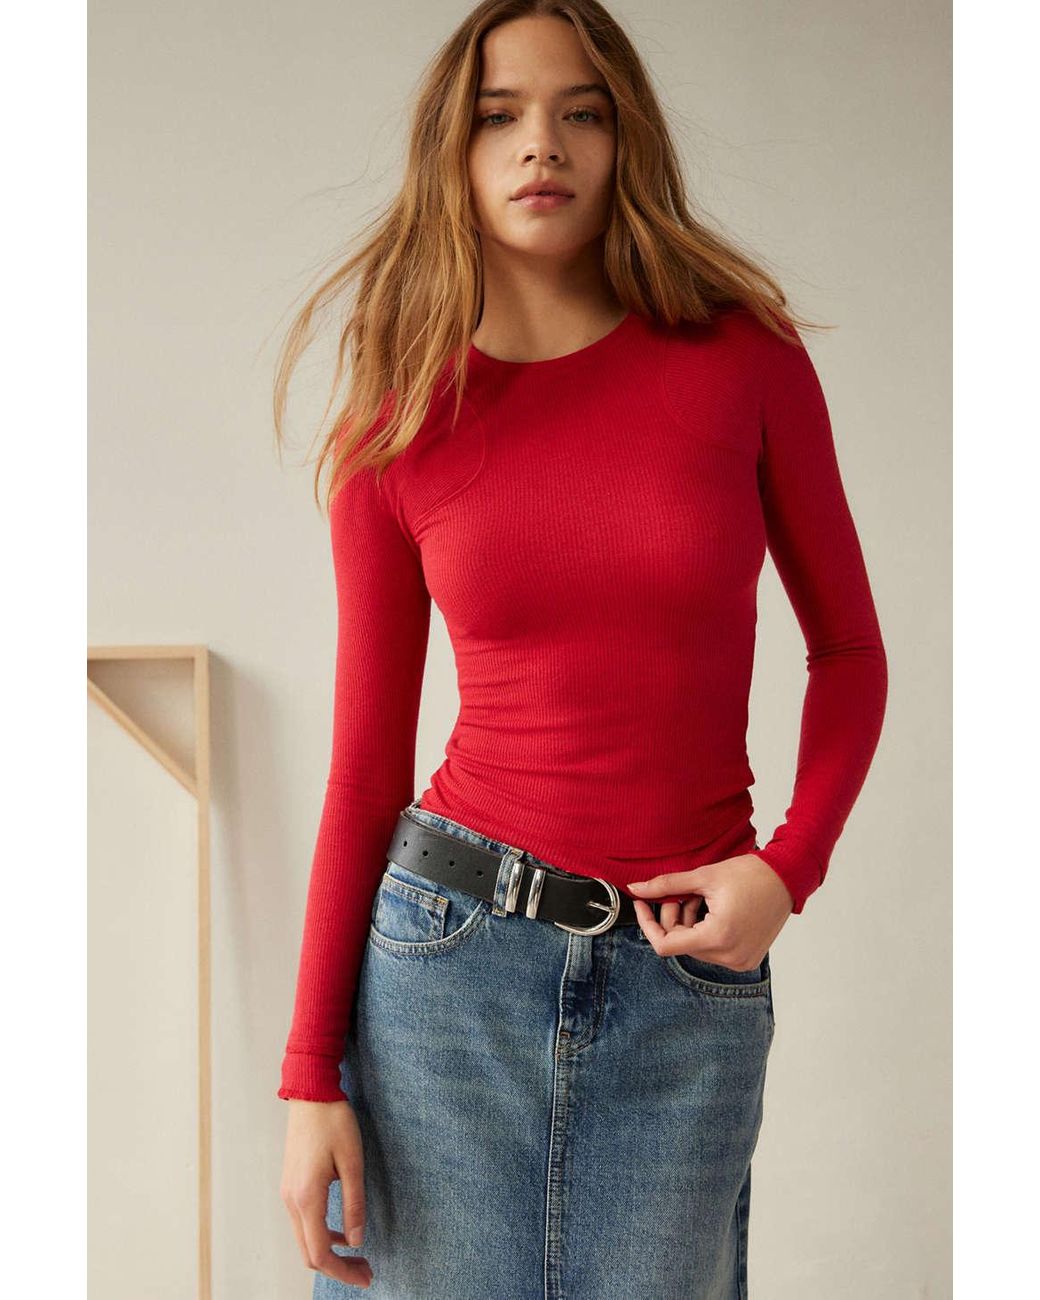 Out From Under Rave Layering Long Sleeve Top In Red,at Urban Outfitters